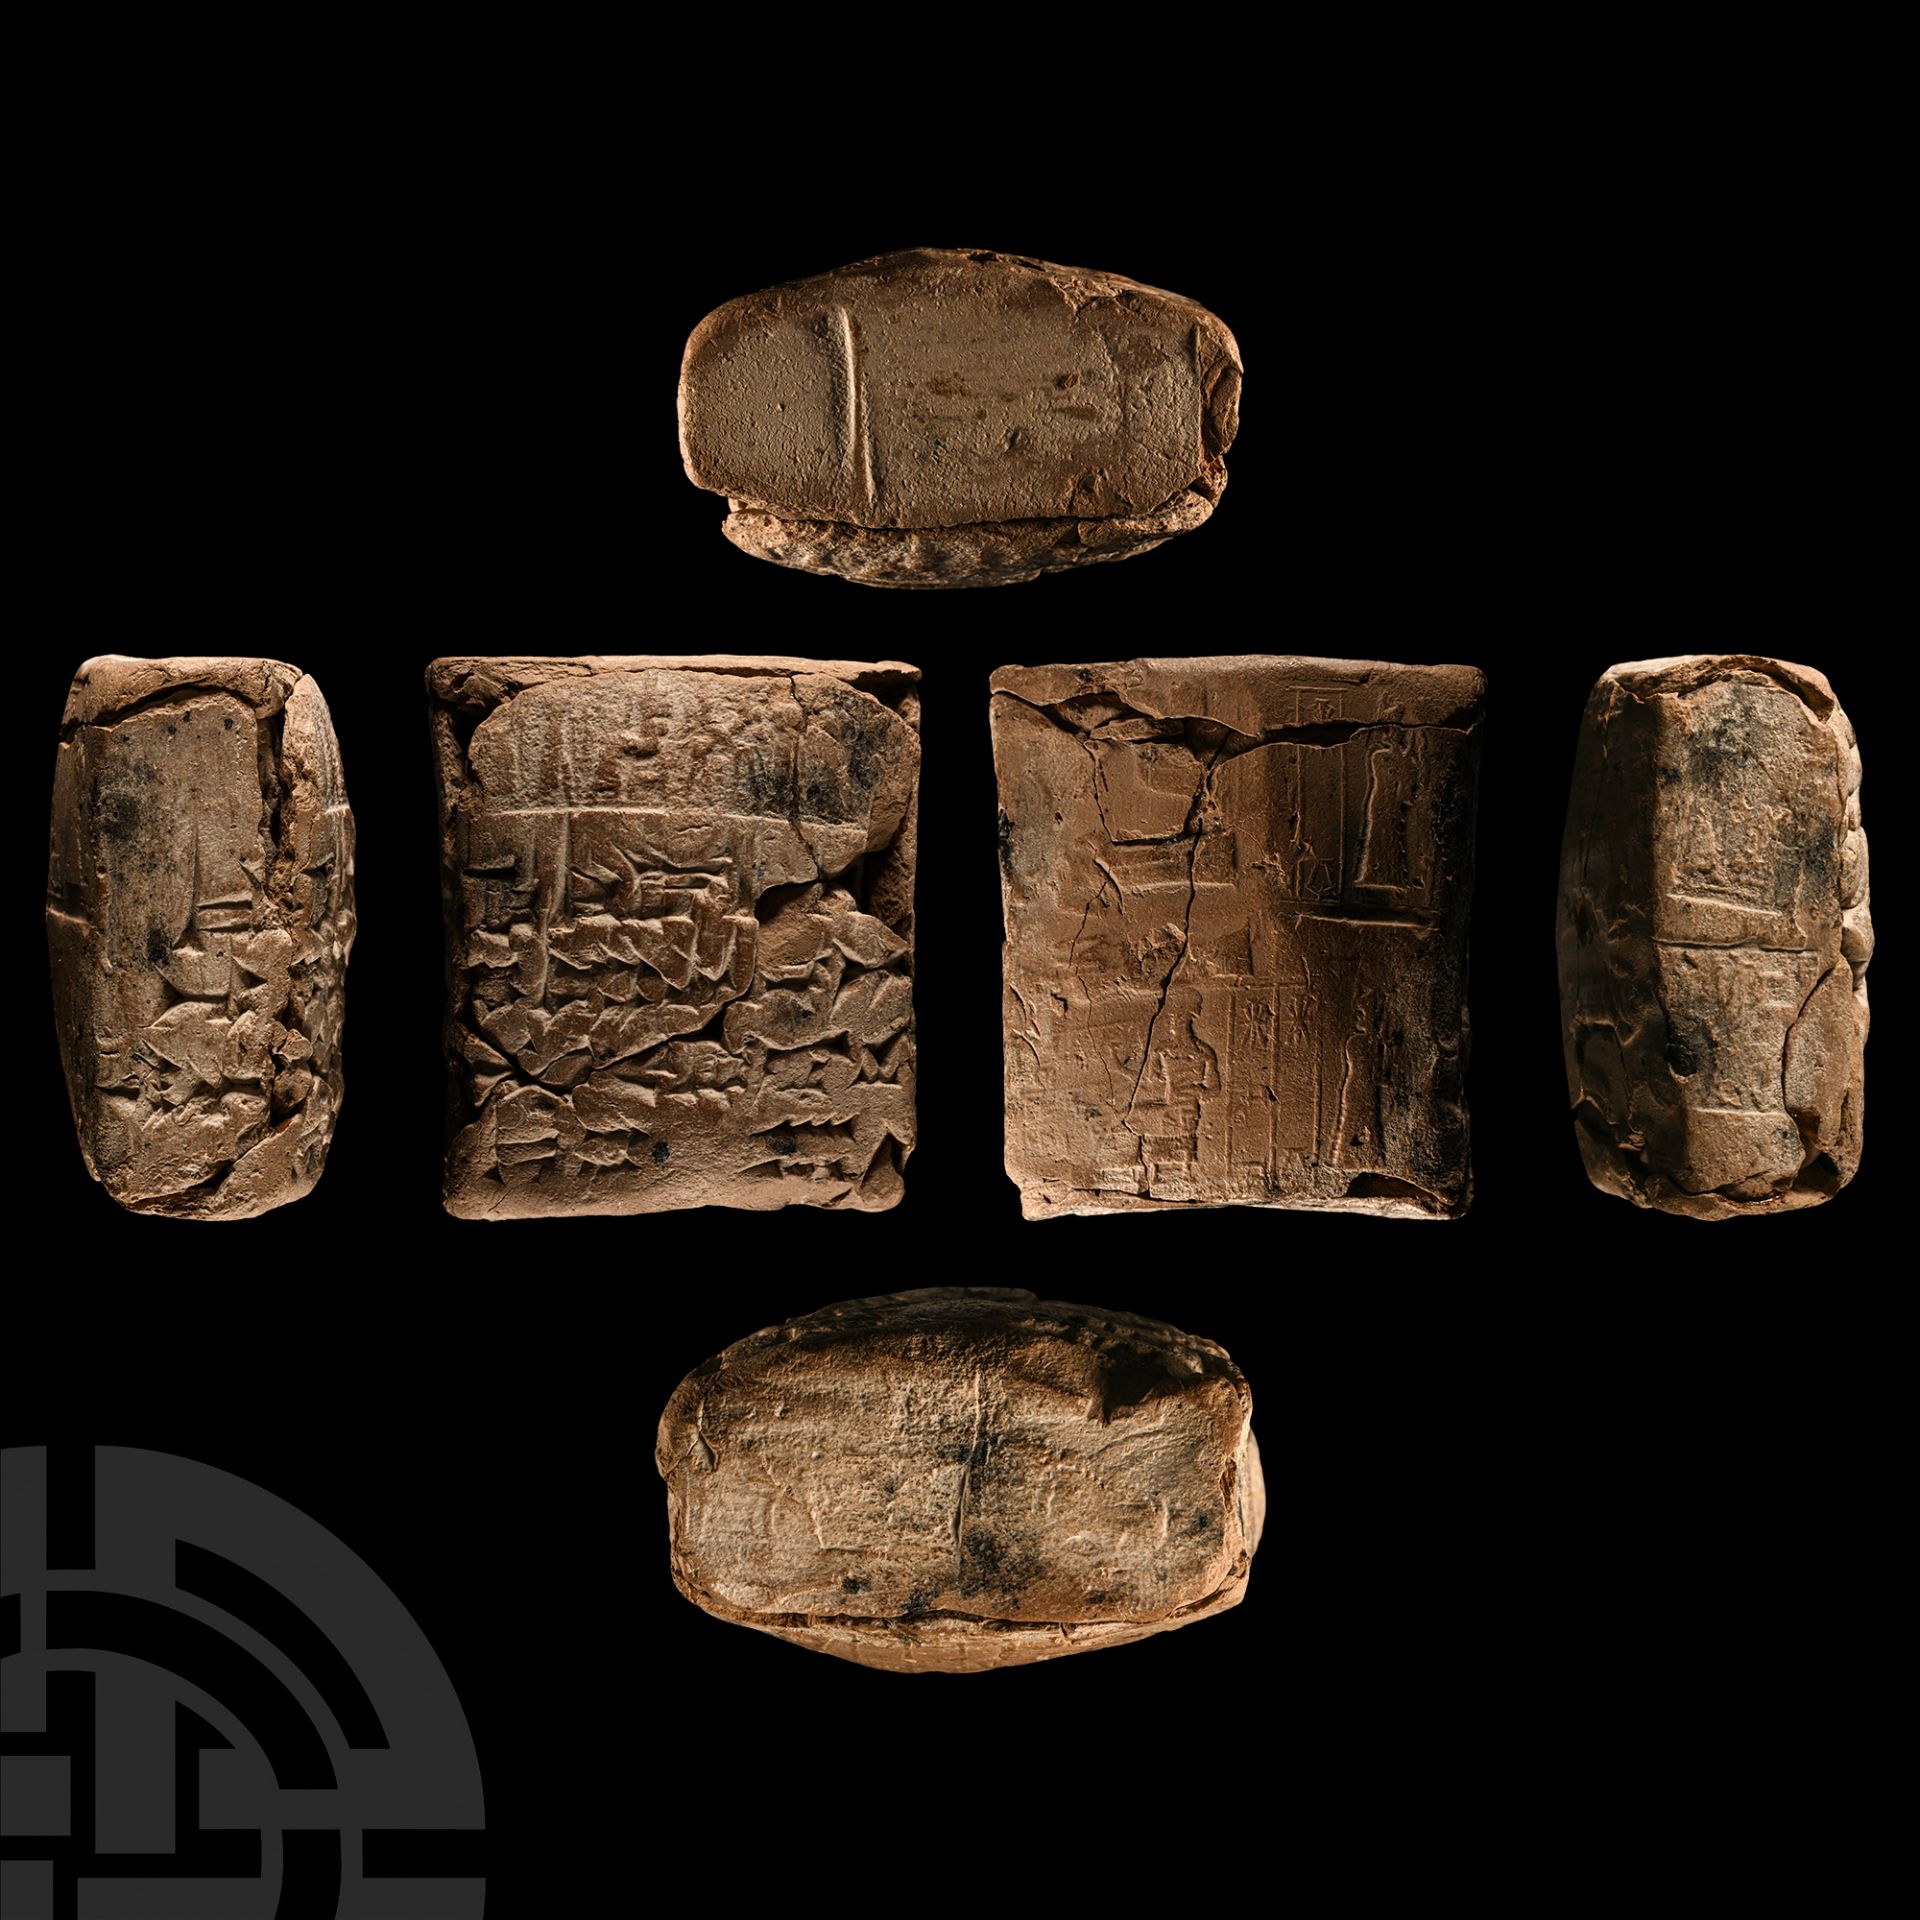 Sumerian Tablet within Envelope with Cylinder Seal Impressions